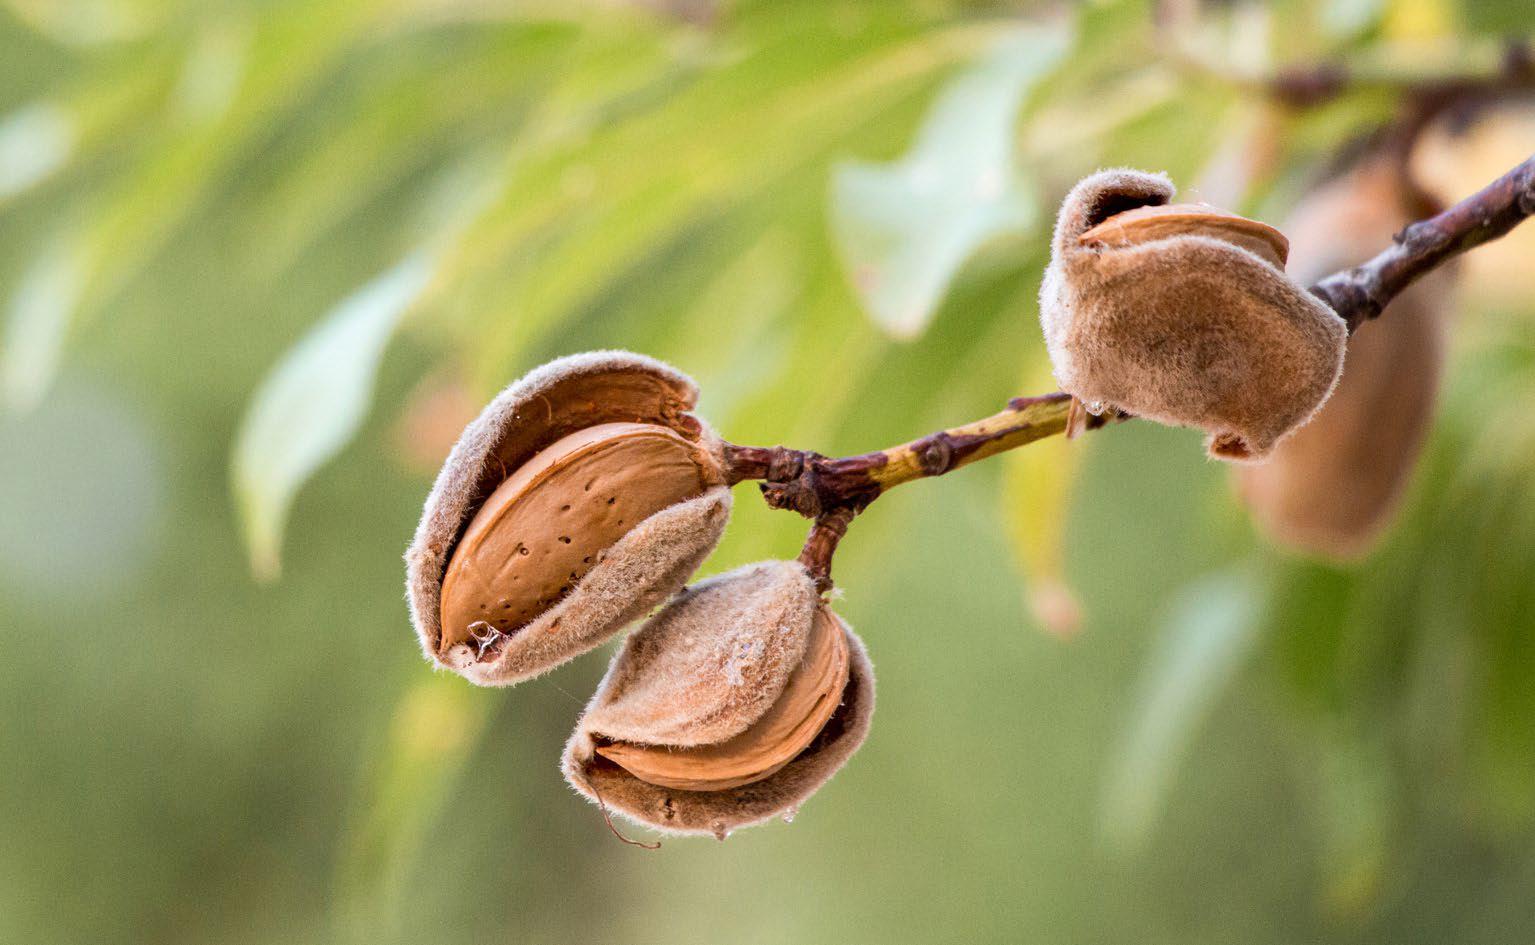 Zero waste almonds: an outreach project on all the uses of almonds